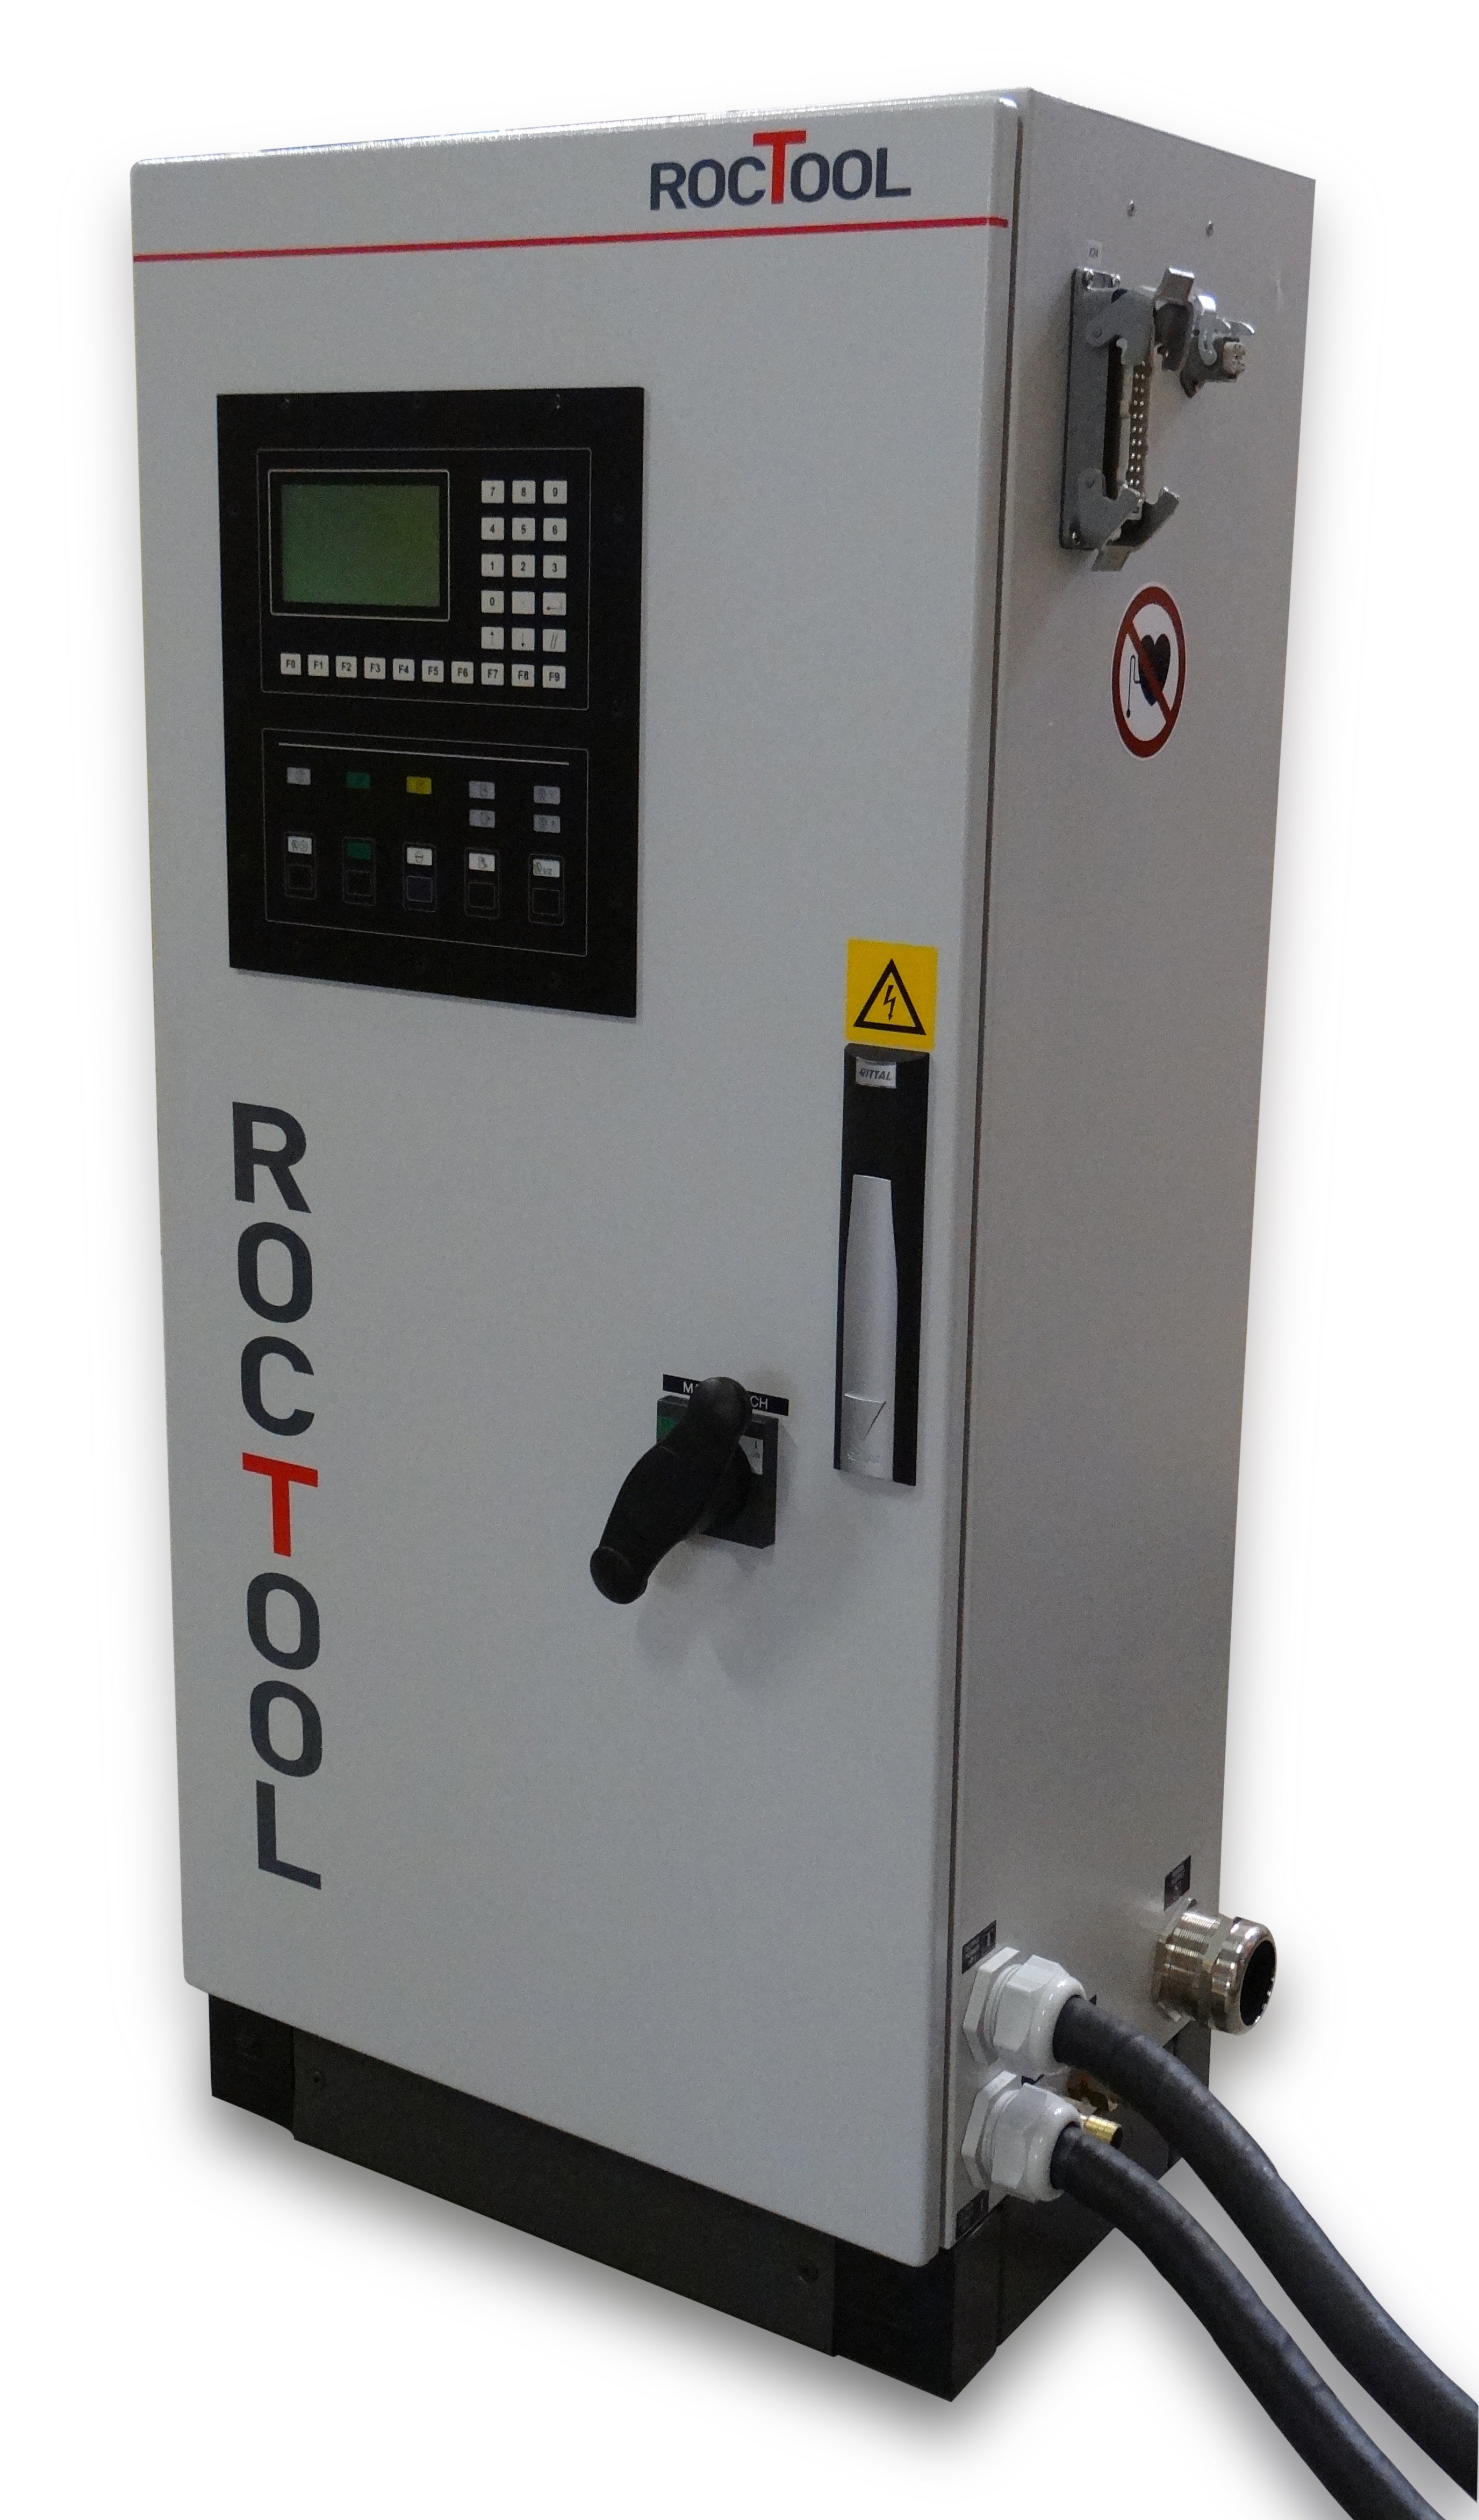 The RocTool process can improve cycle time and surface appearance on a range of thermoset and thermoplastic materials.